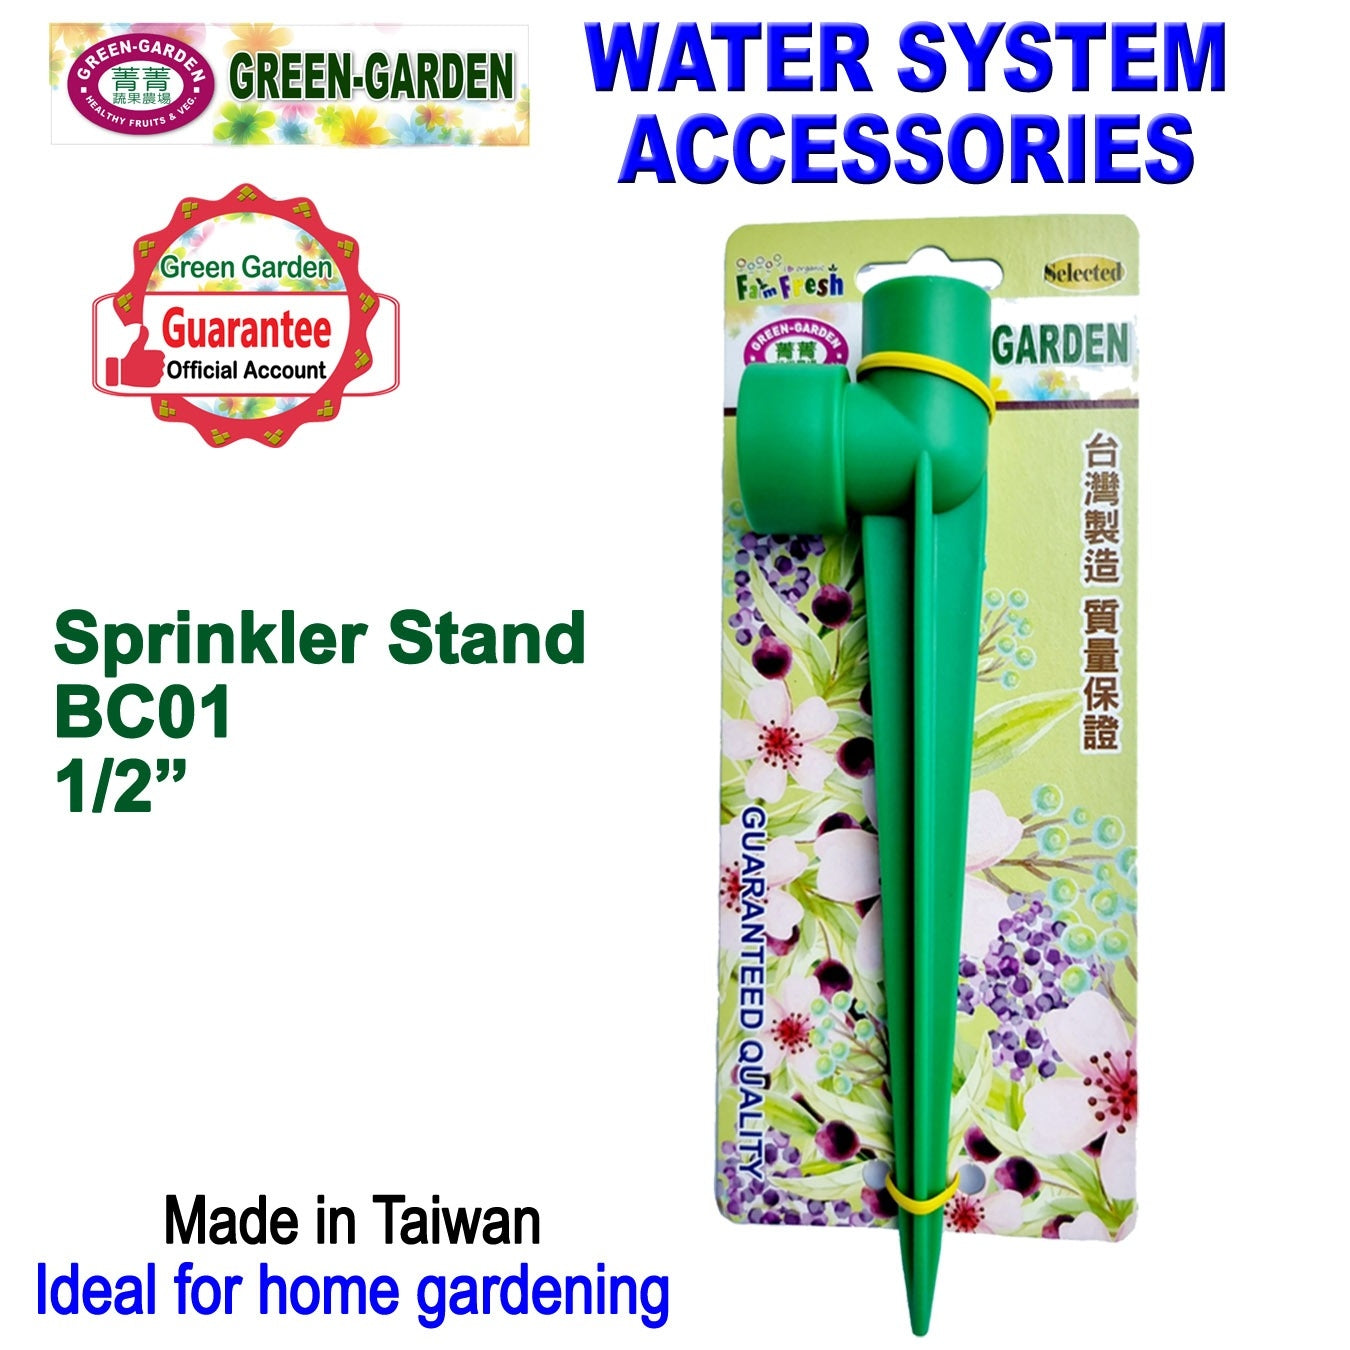 Water System Accessories Sprinkler Stand 1/2"